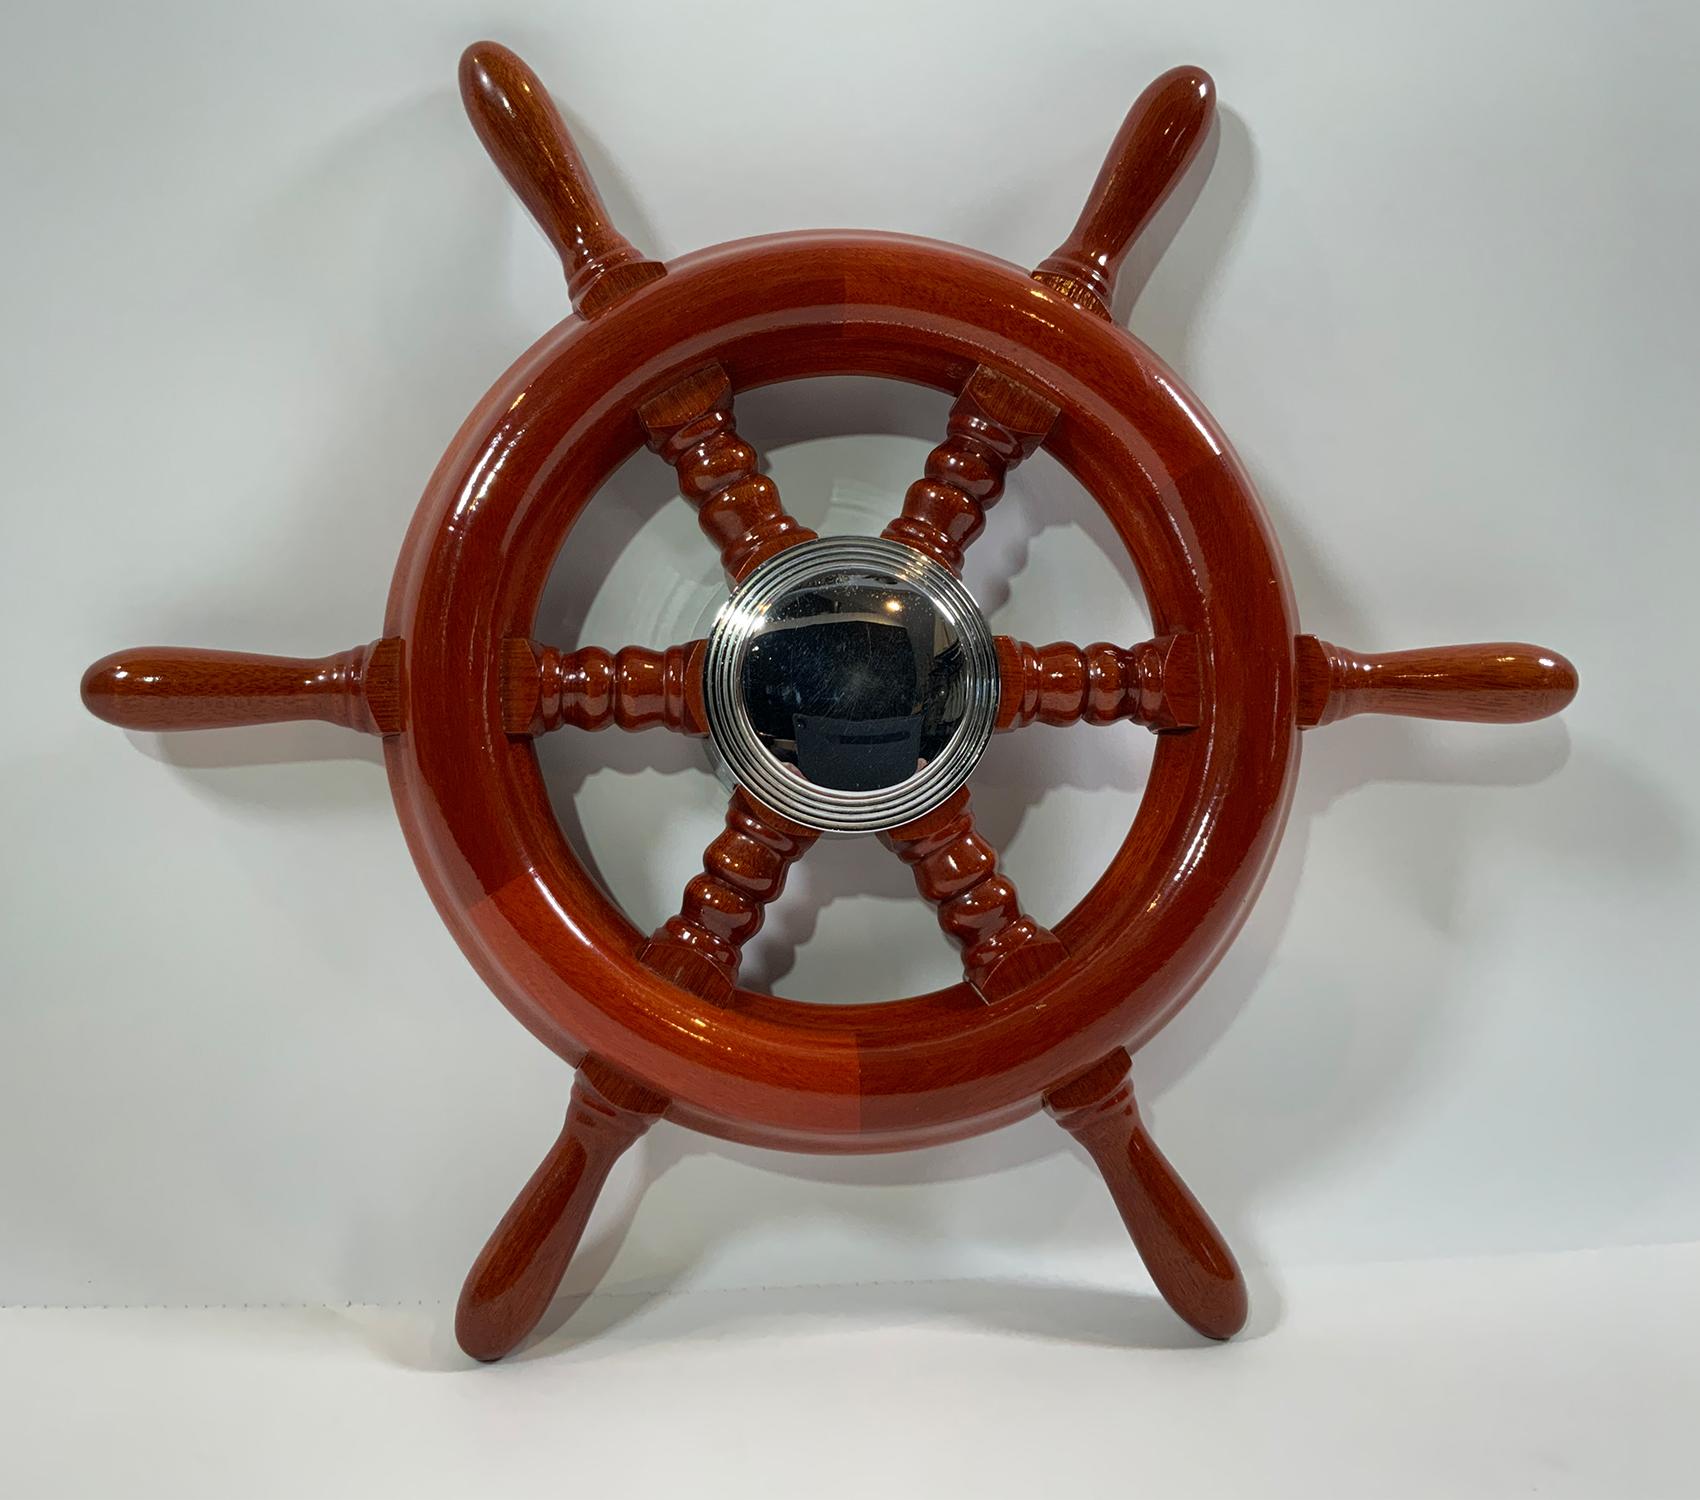 Six spoke varnished ships wheel with chrome hub. Very clean. Appears to be new old stock. Quite decorative or put it on your boat.

Weight: 3 LBS
Overall Dimensions: 17